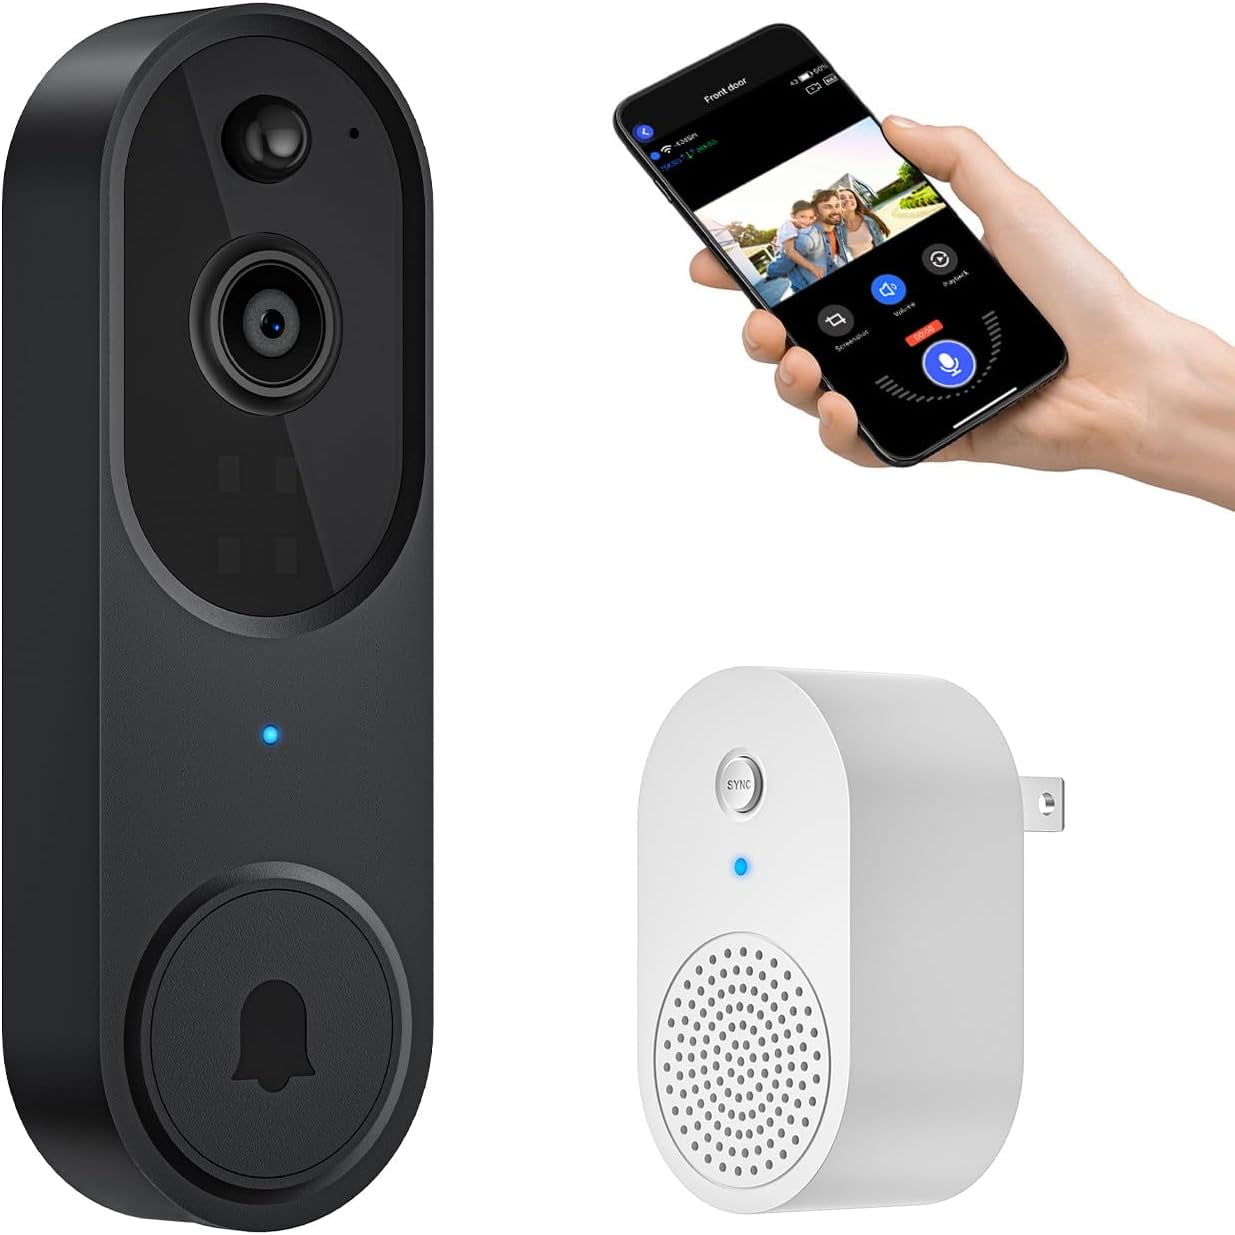 Smart 5MP Reolink Video Doorbell with Chime Now Open for Trial!